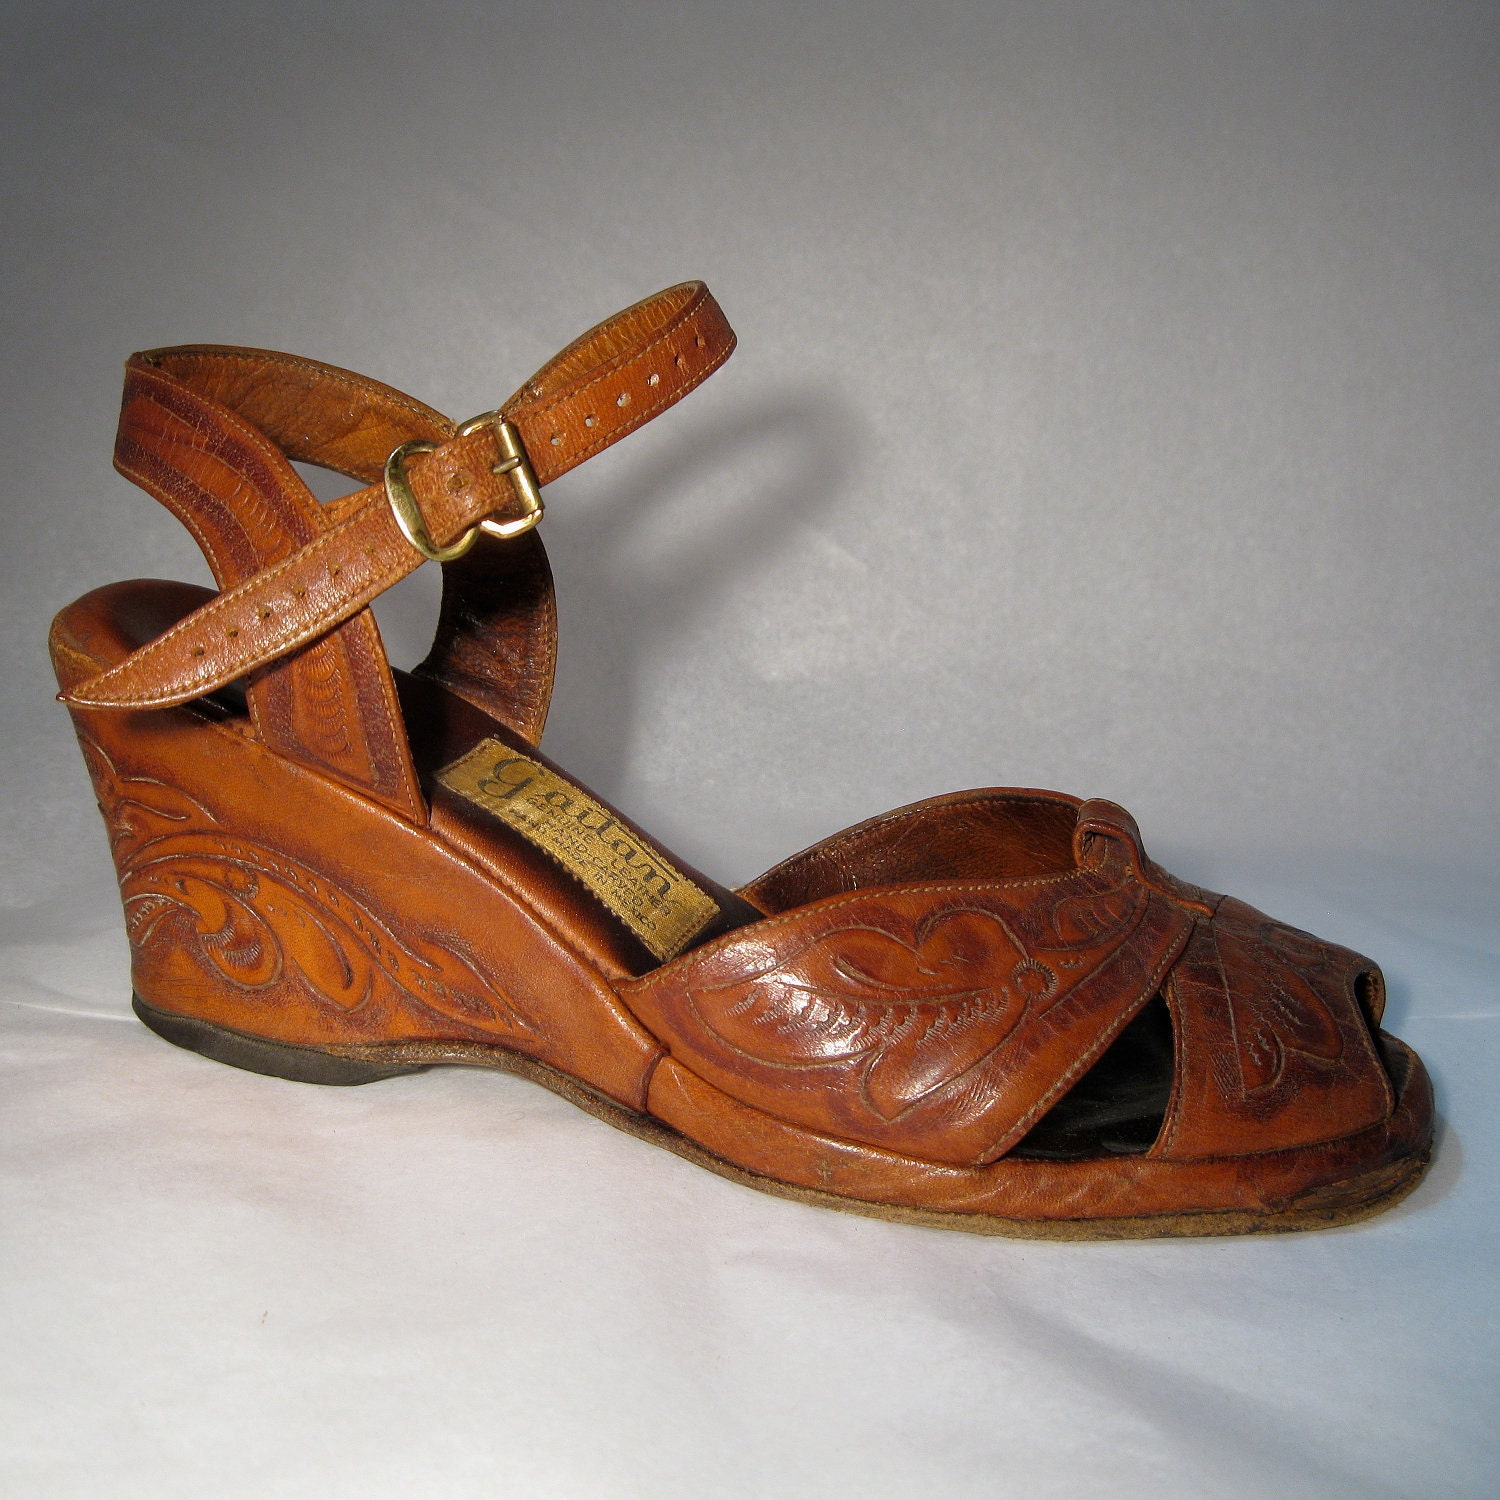 Vintage 1940s Wedge Shoes Handtooled Leather by AlexSandras